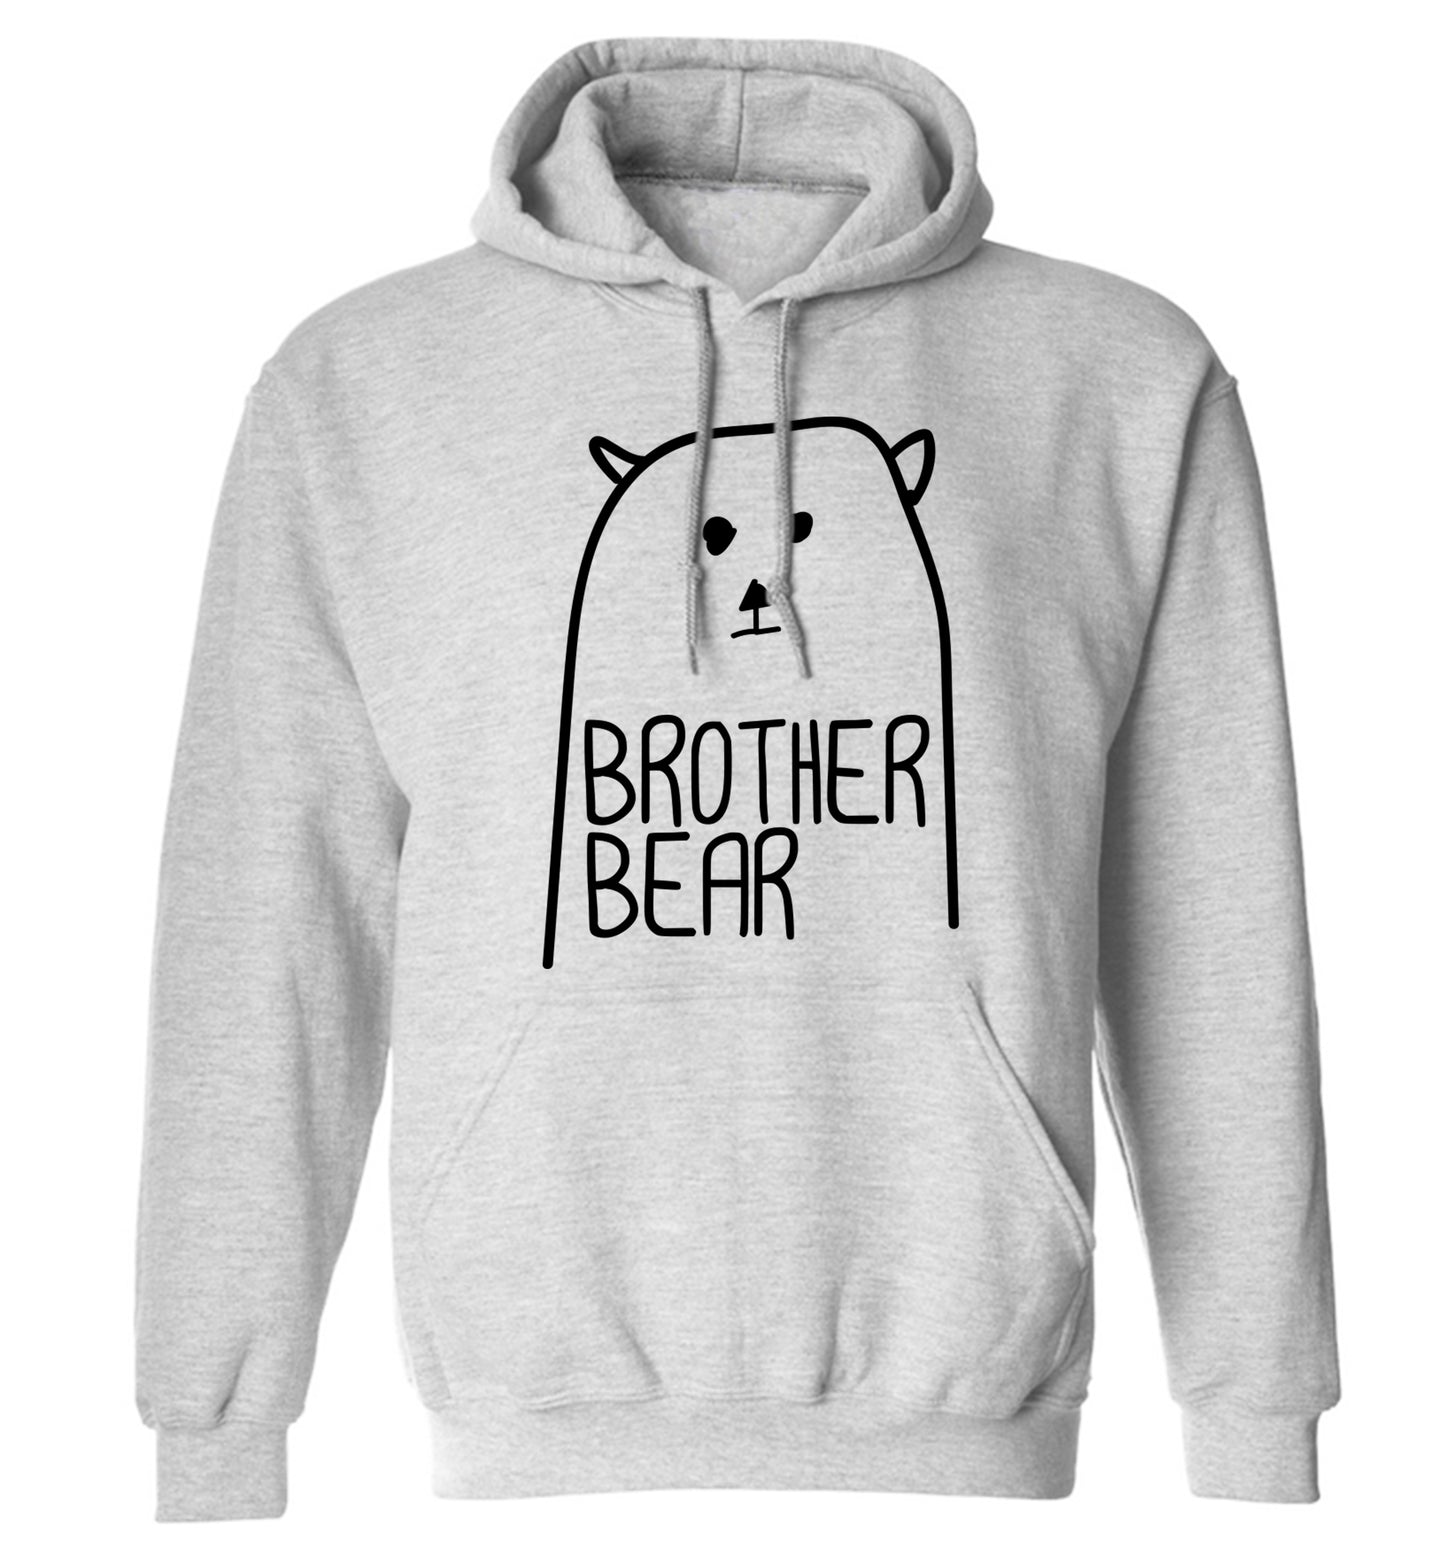 Brother bear adults unisex grey hoodie 2XL